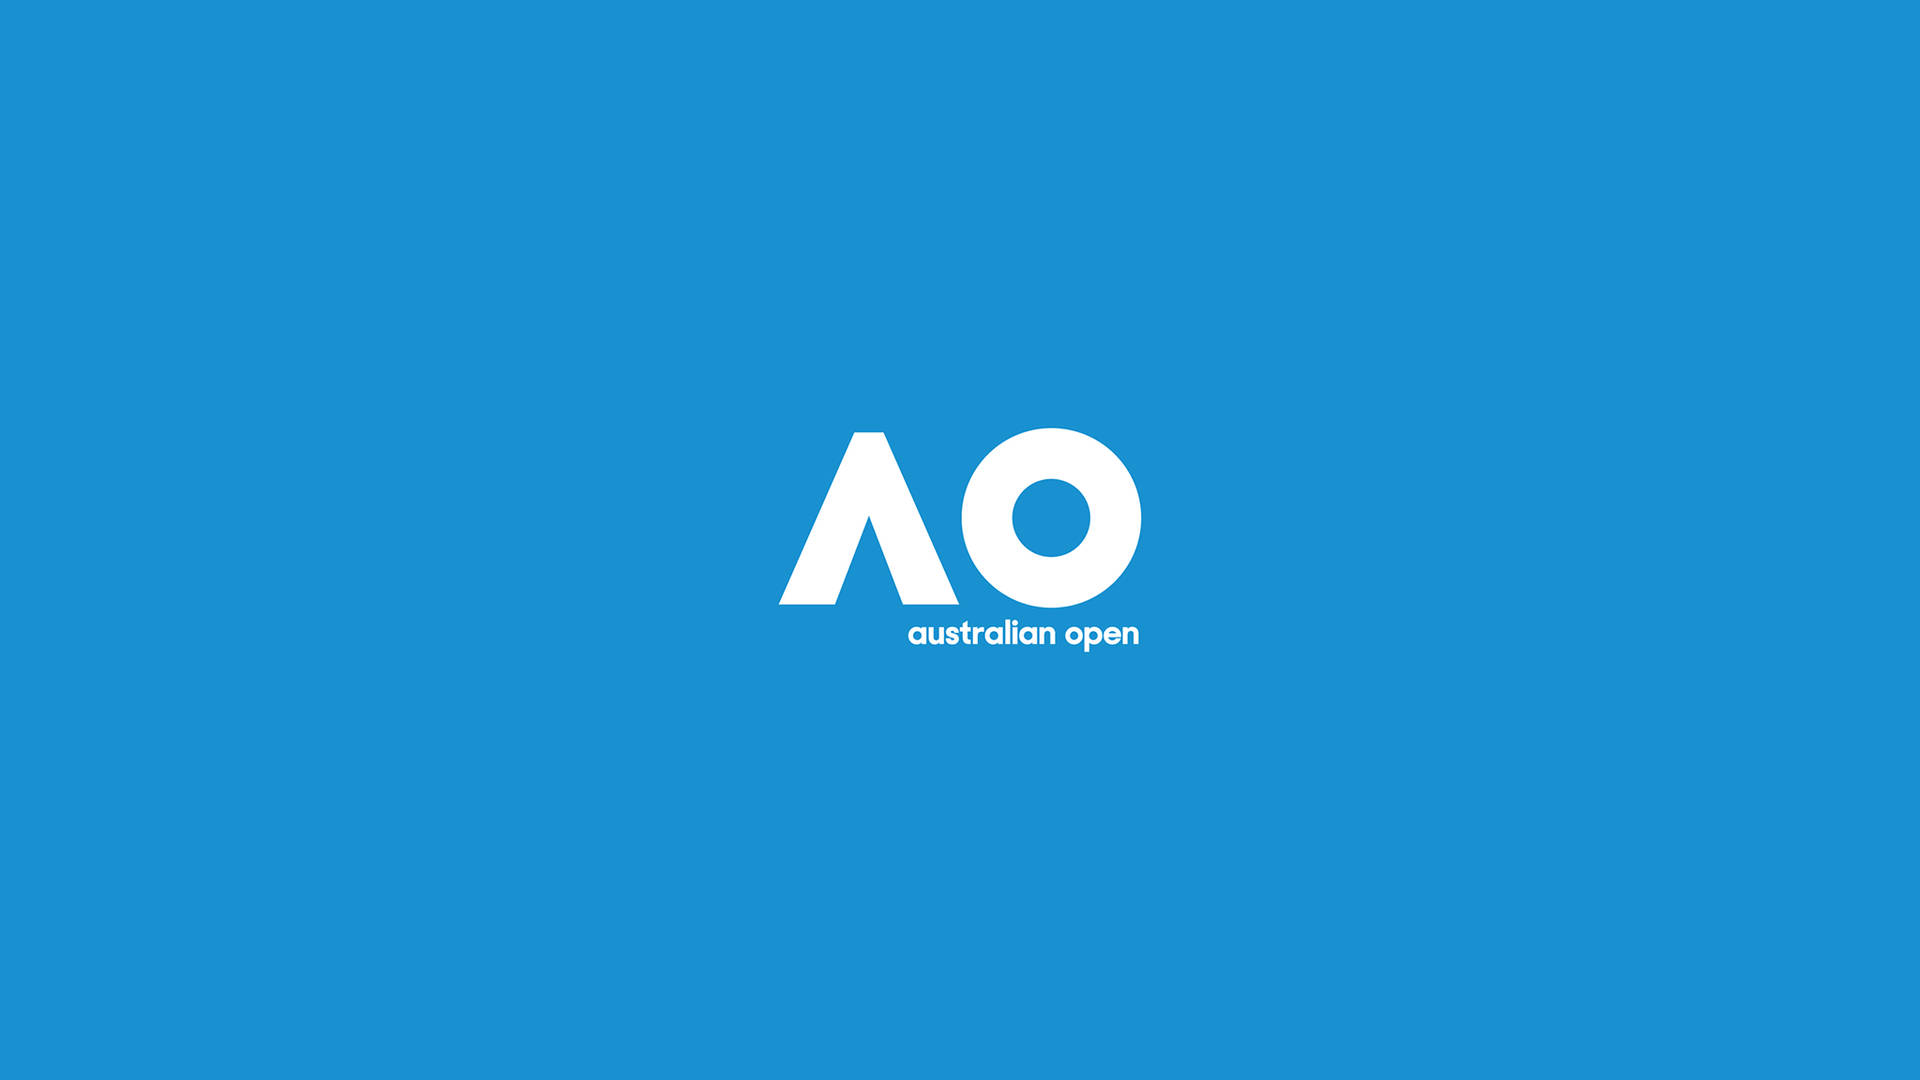 A Glance At The Australian Open - Minimalistic Infusion Of Blue Background